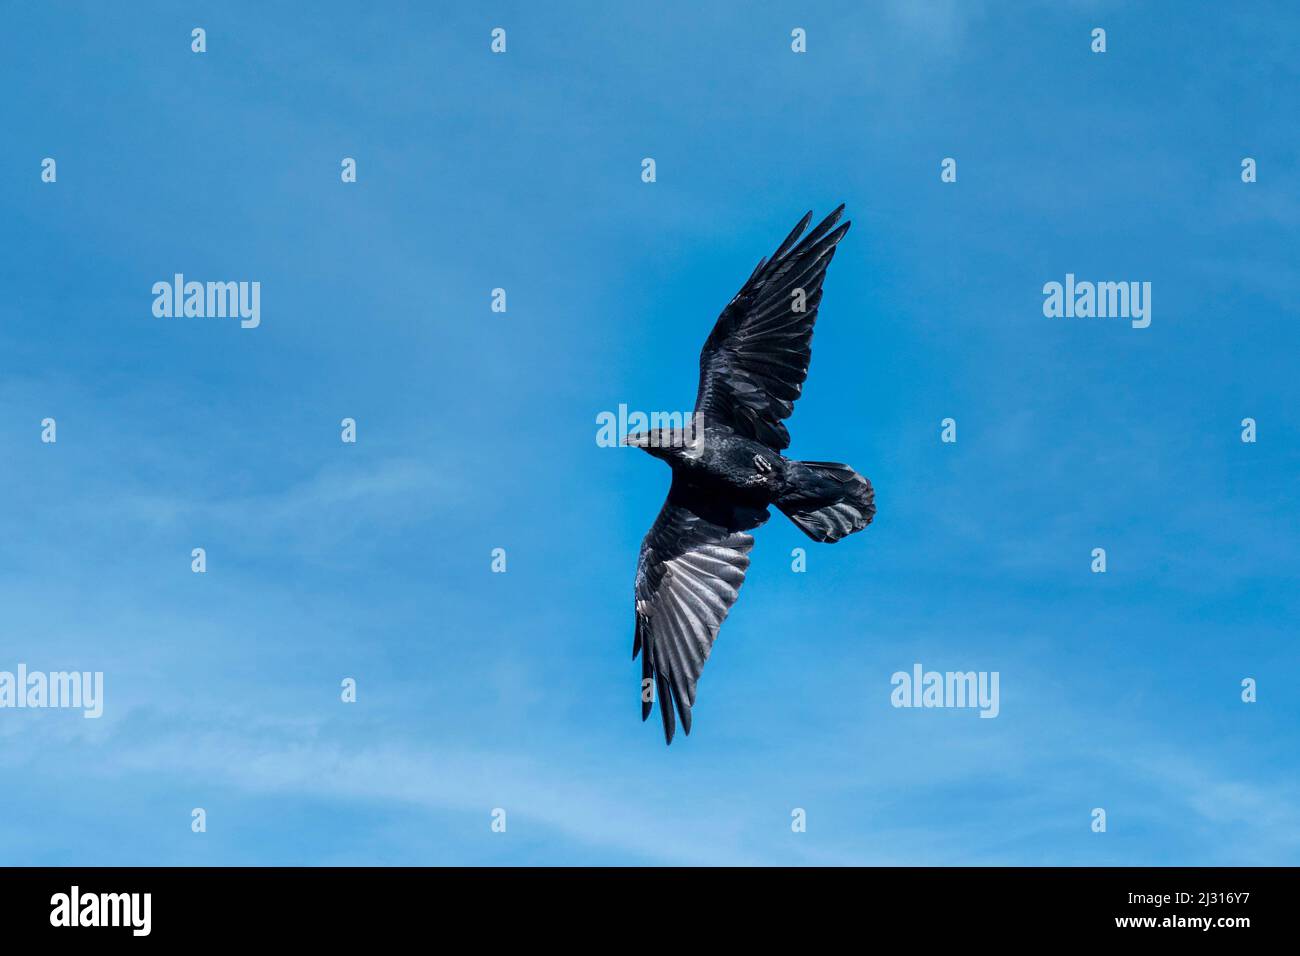 Chihuhuan Raven Flying in a Cloudy Blue Sky Stock Photo